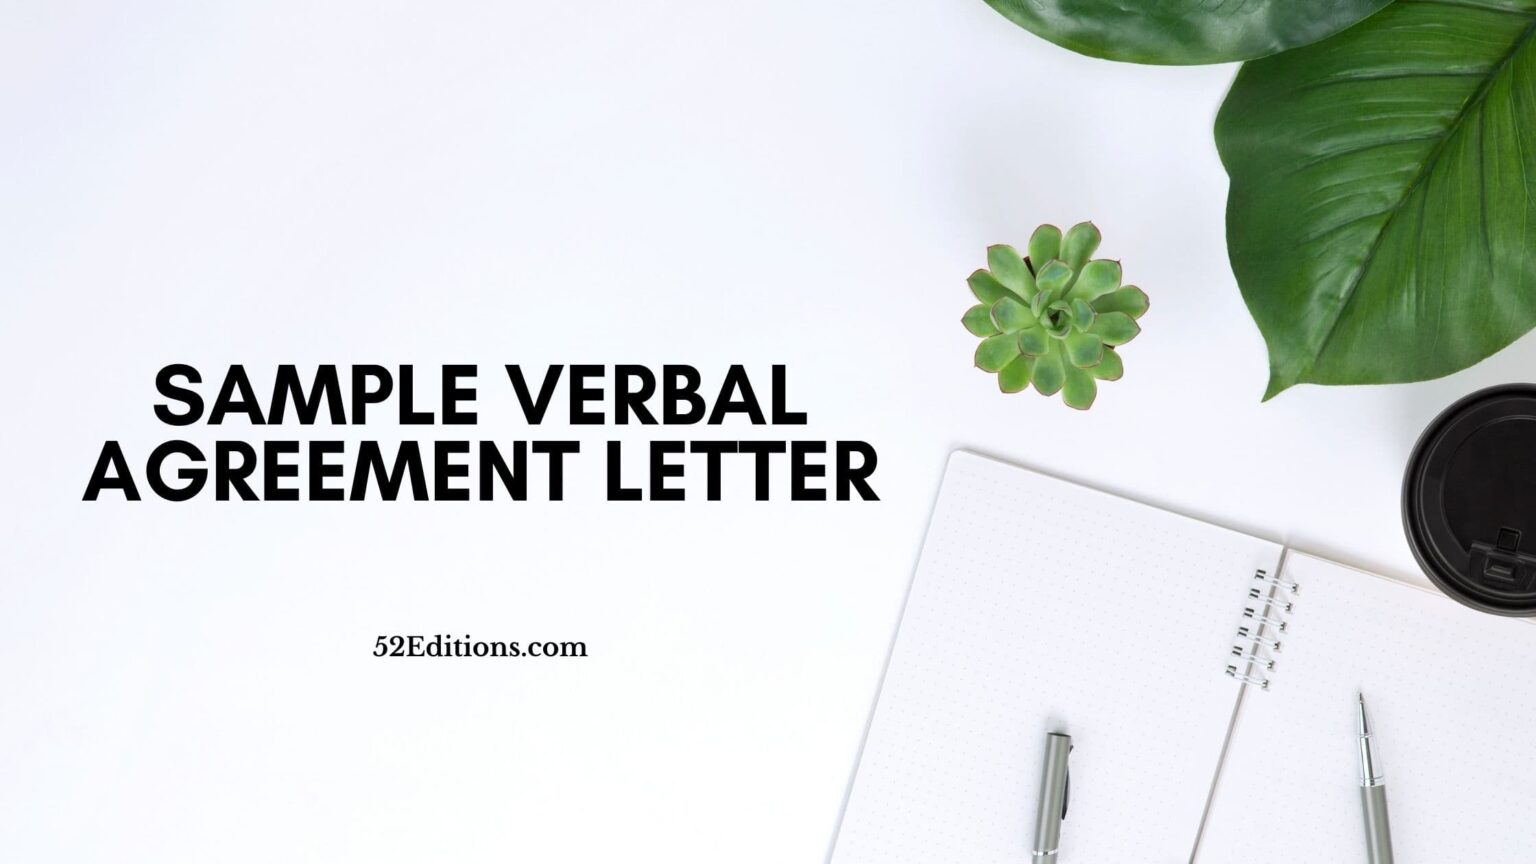 Sample Verbal Agreement Letter // Get FREE Letter Templates (Print or